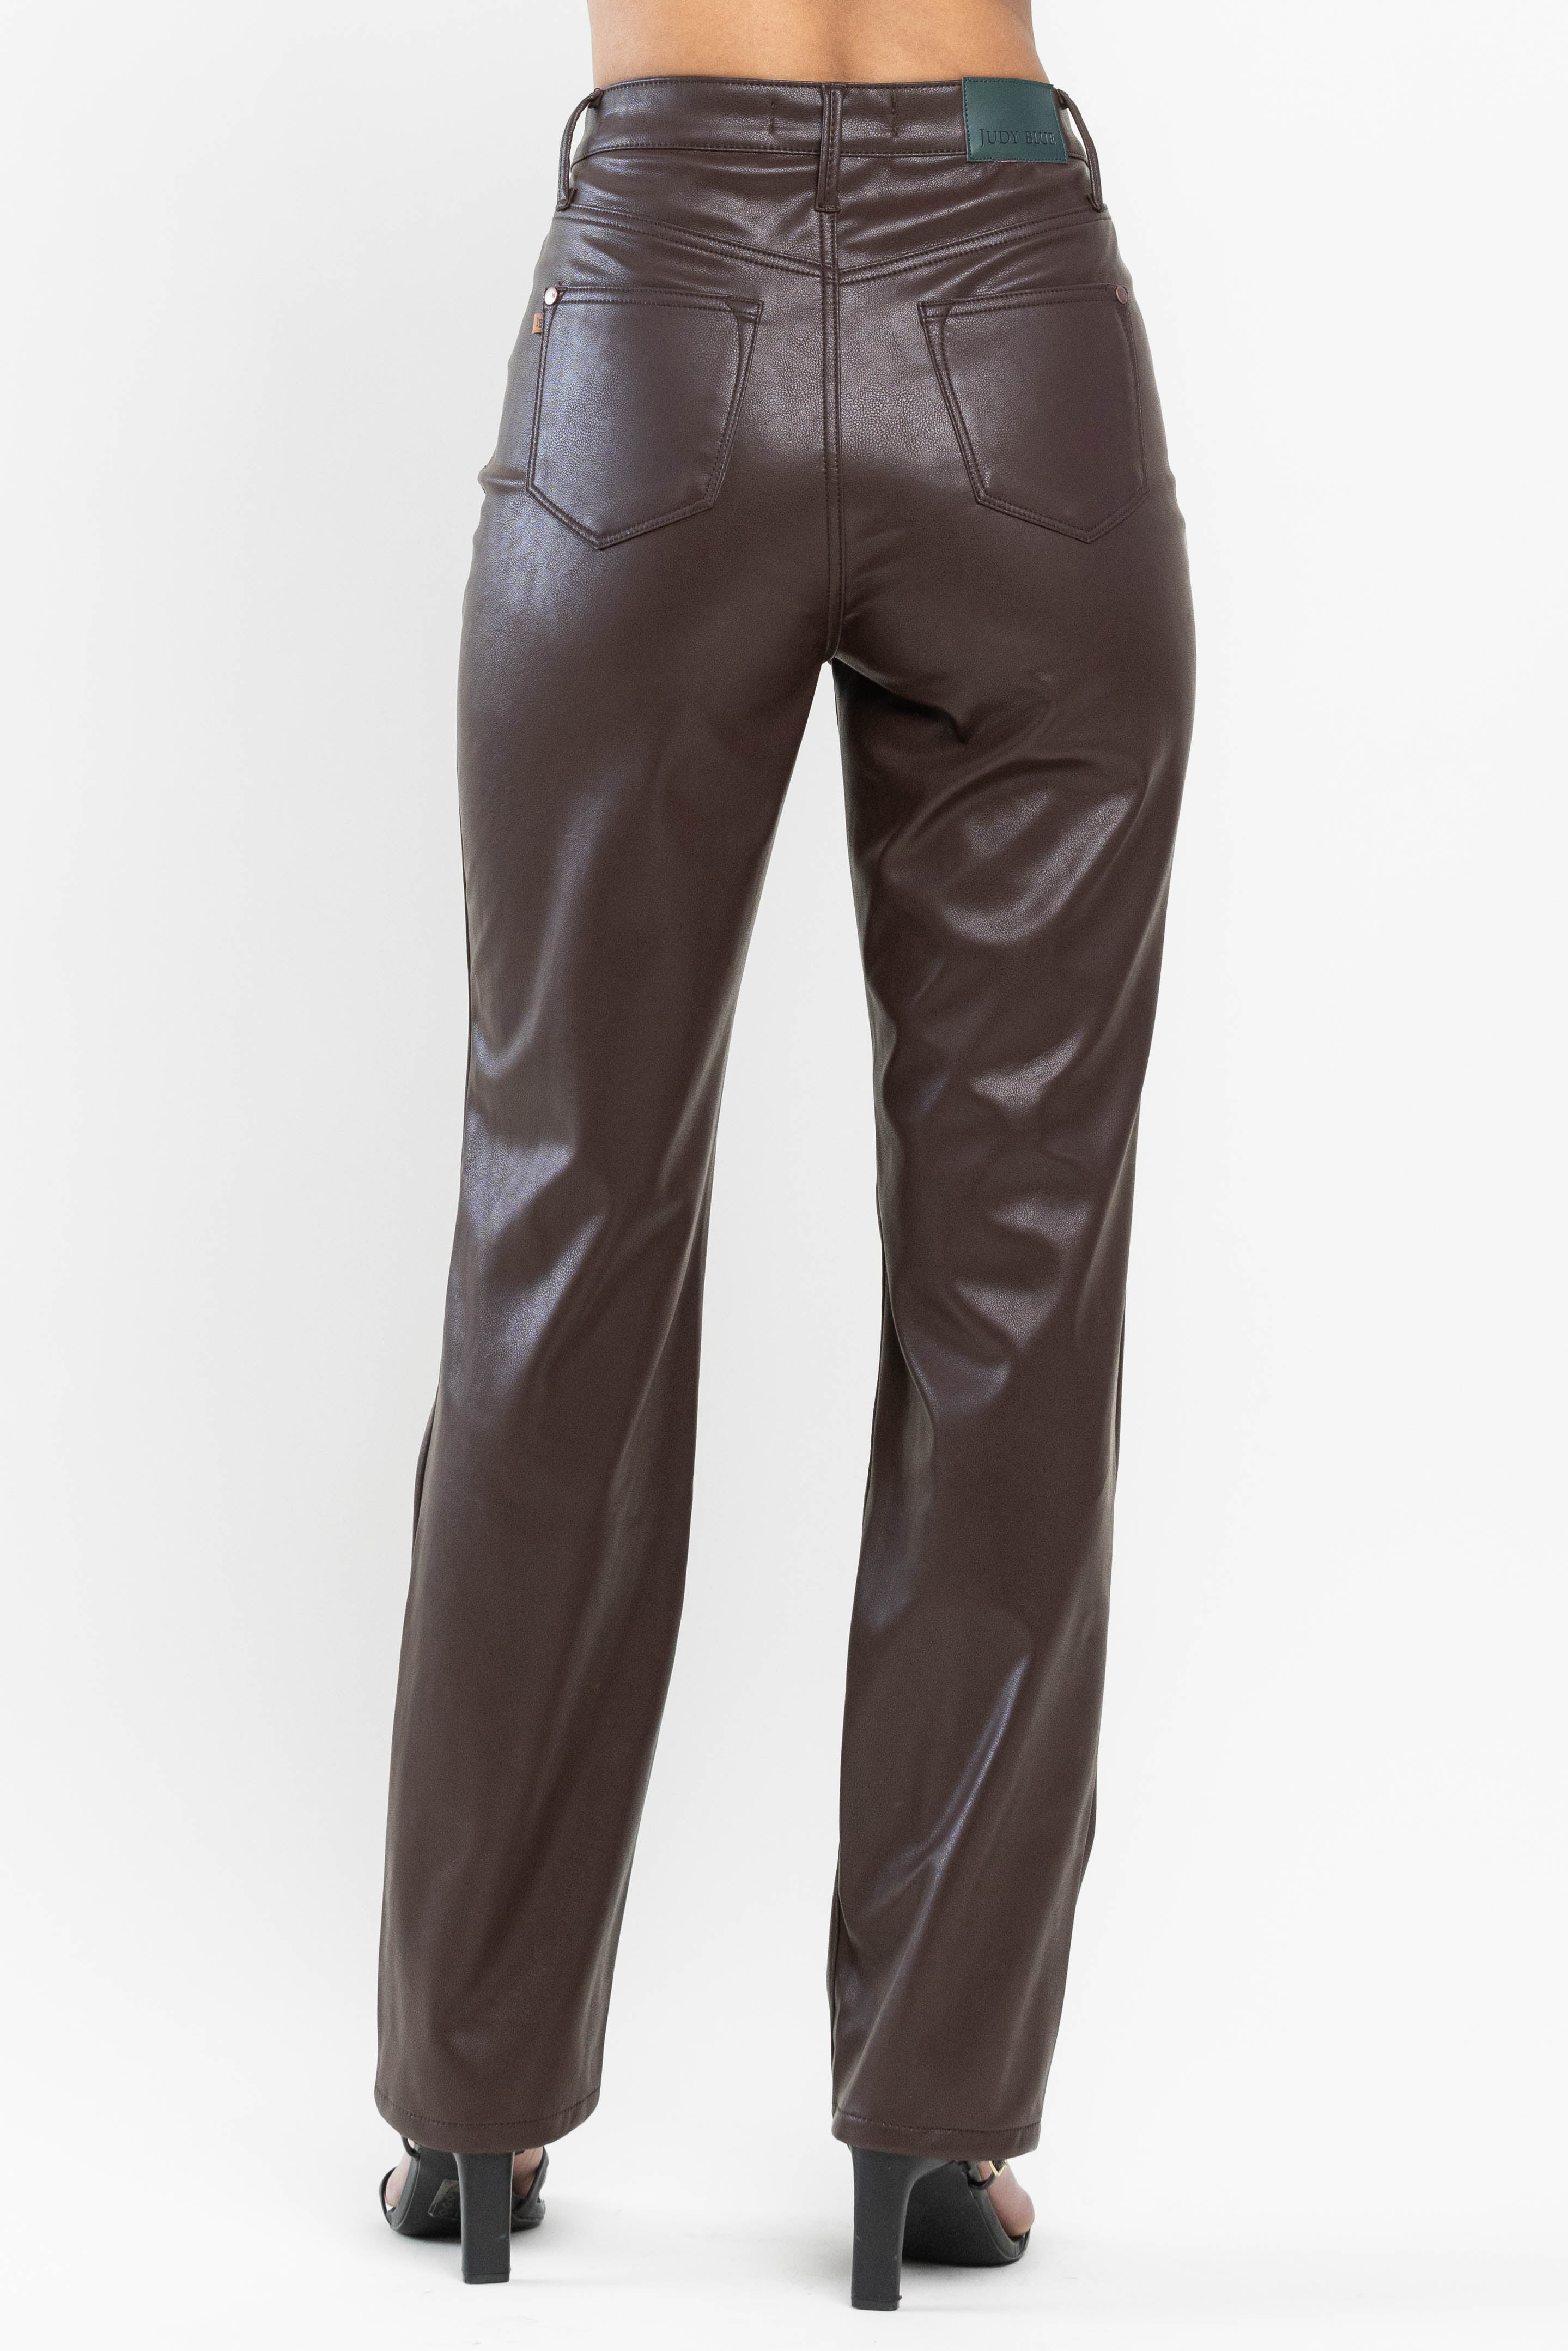 Judy Blue Tummy Control Brown Faux Leather Pants-200 Jeans- Simply Simpson's Boutique is a Women's Online Fashion Boutique Located in Jupiter, Florida